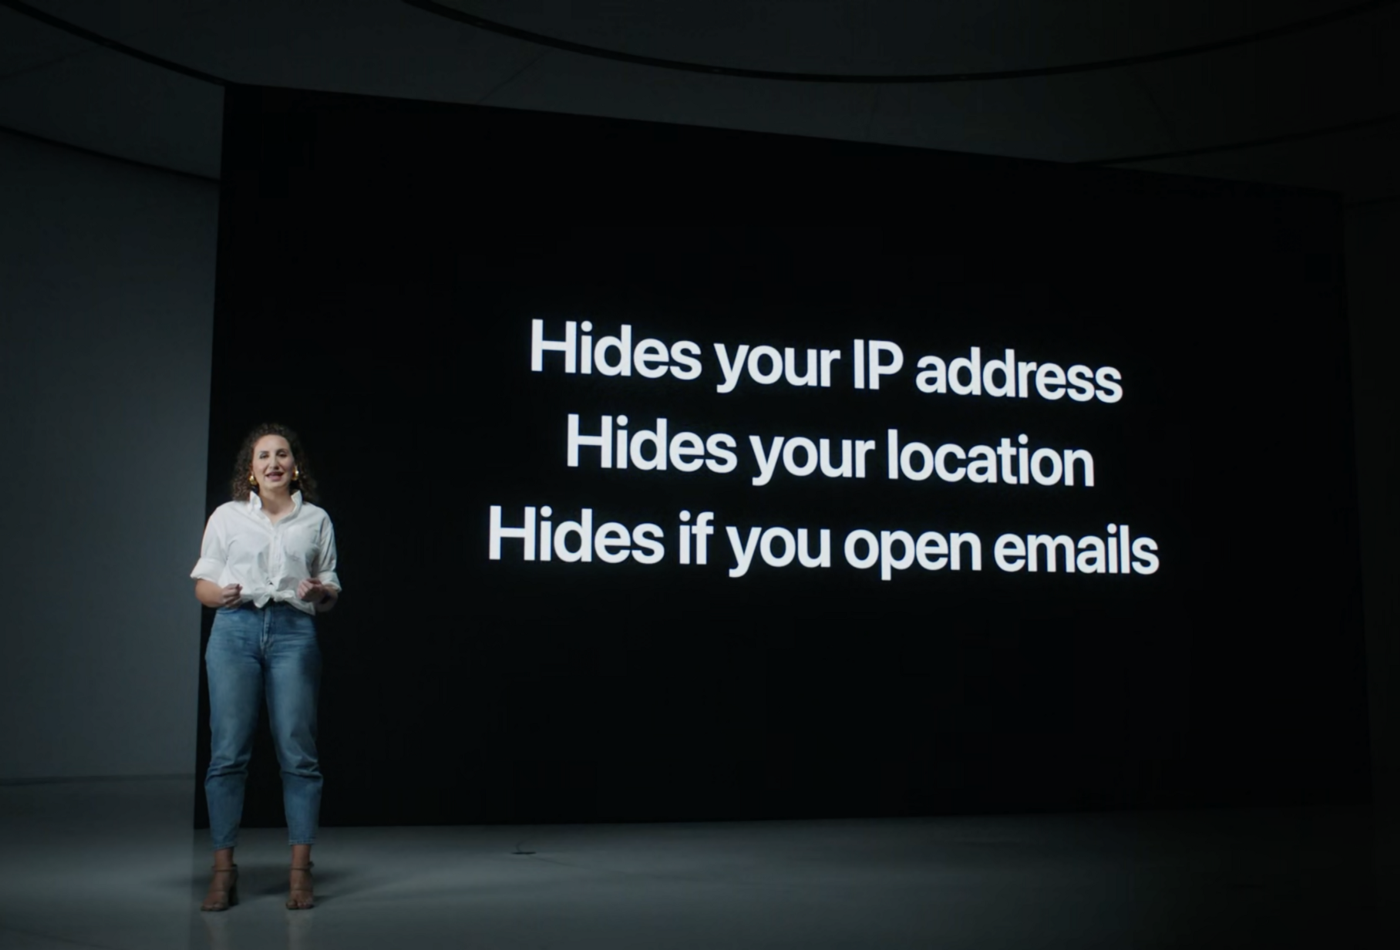 Apple announces several new security features